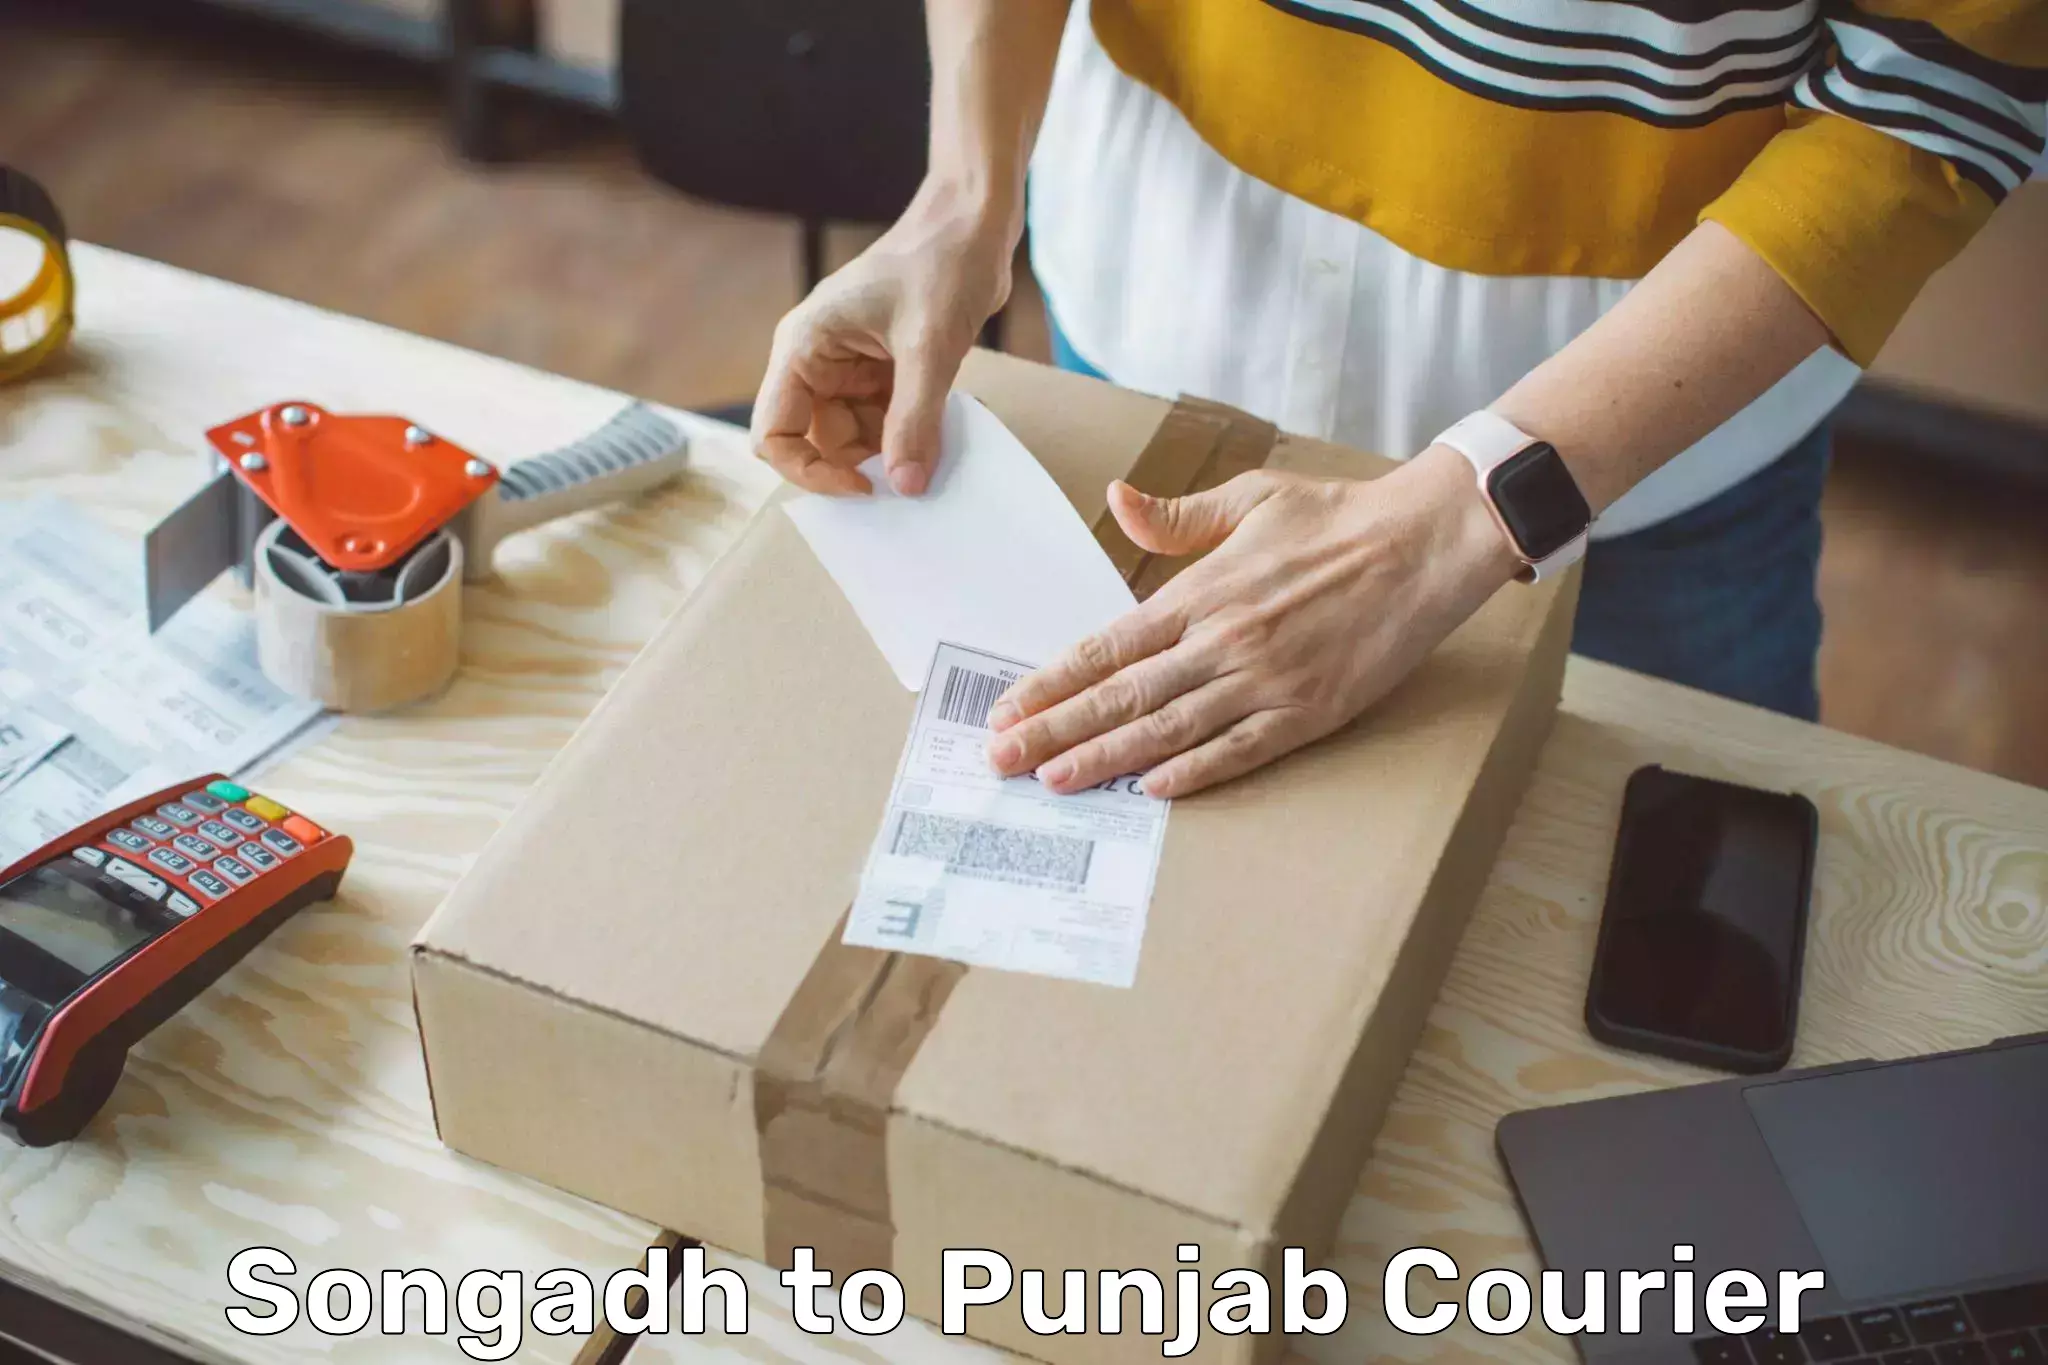 Courier service partnerships Songadh to Amritsar